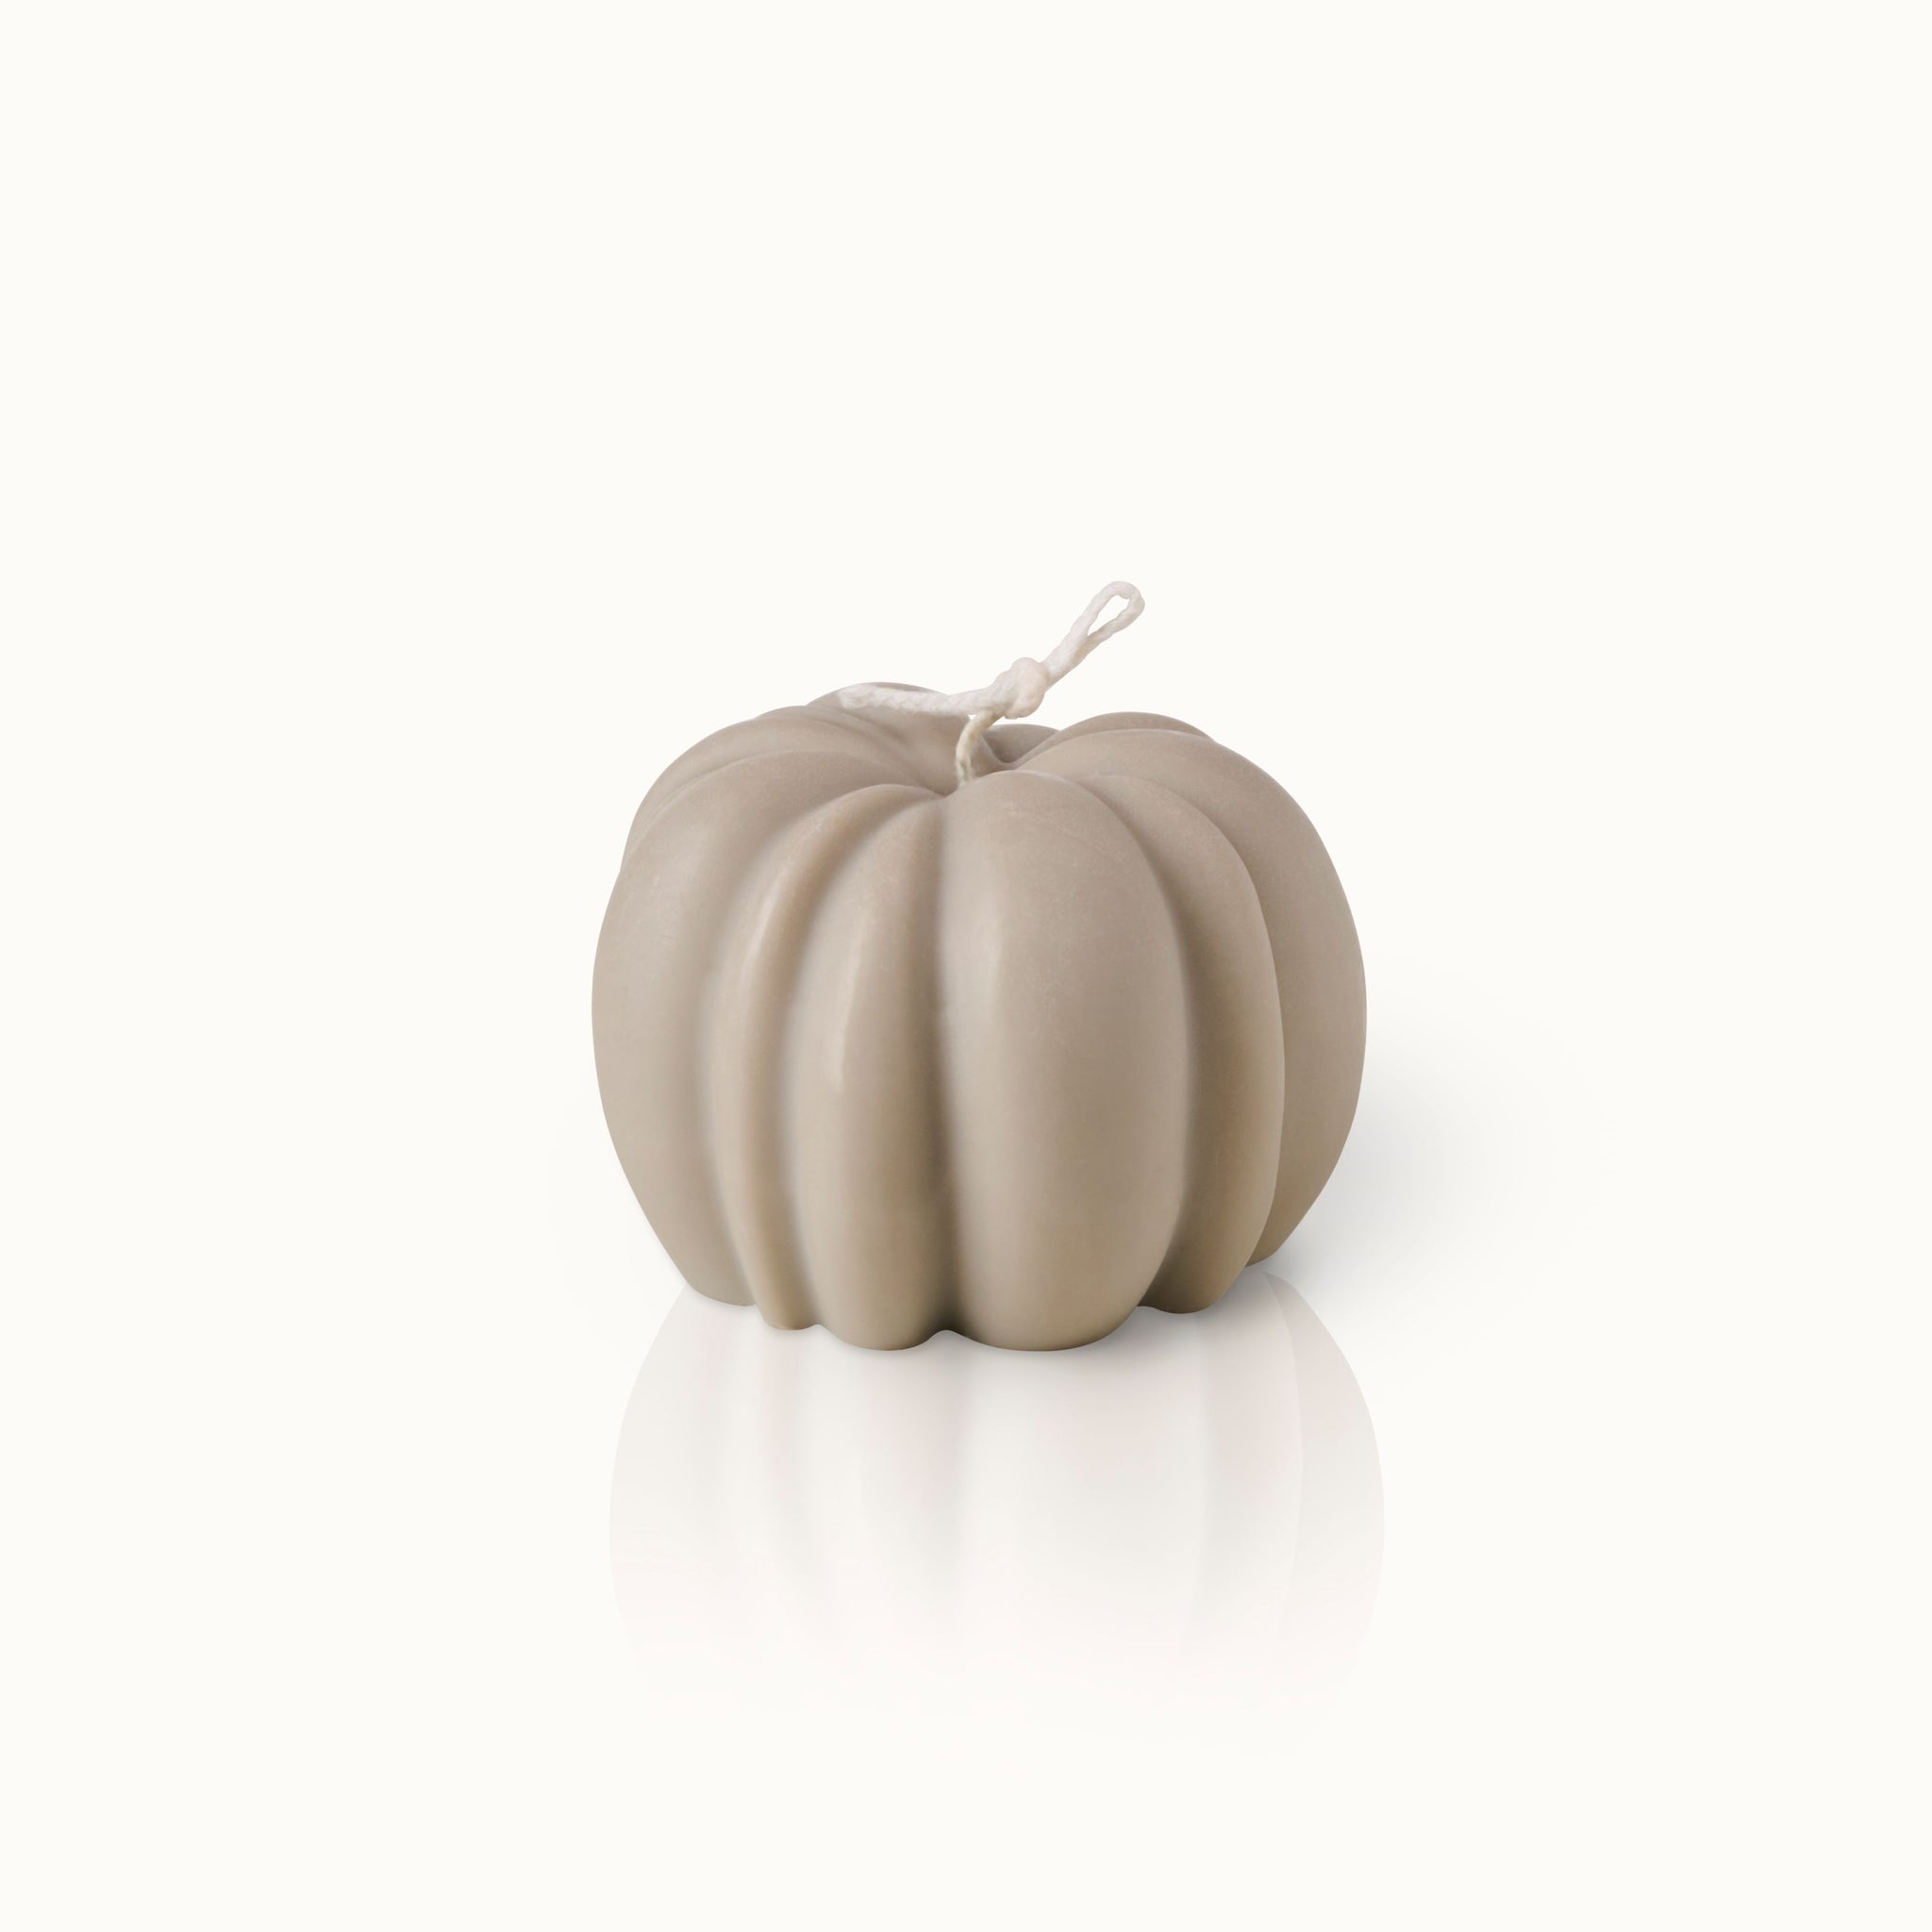 The Pumpkin Taupe